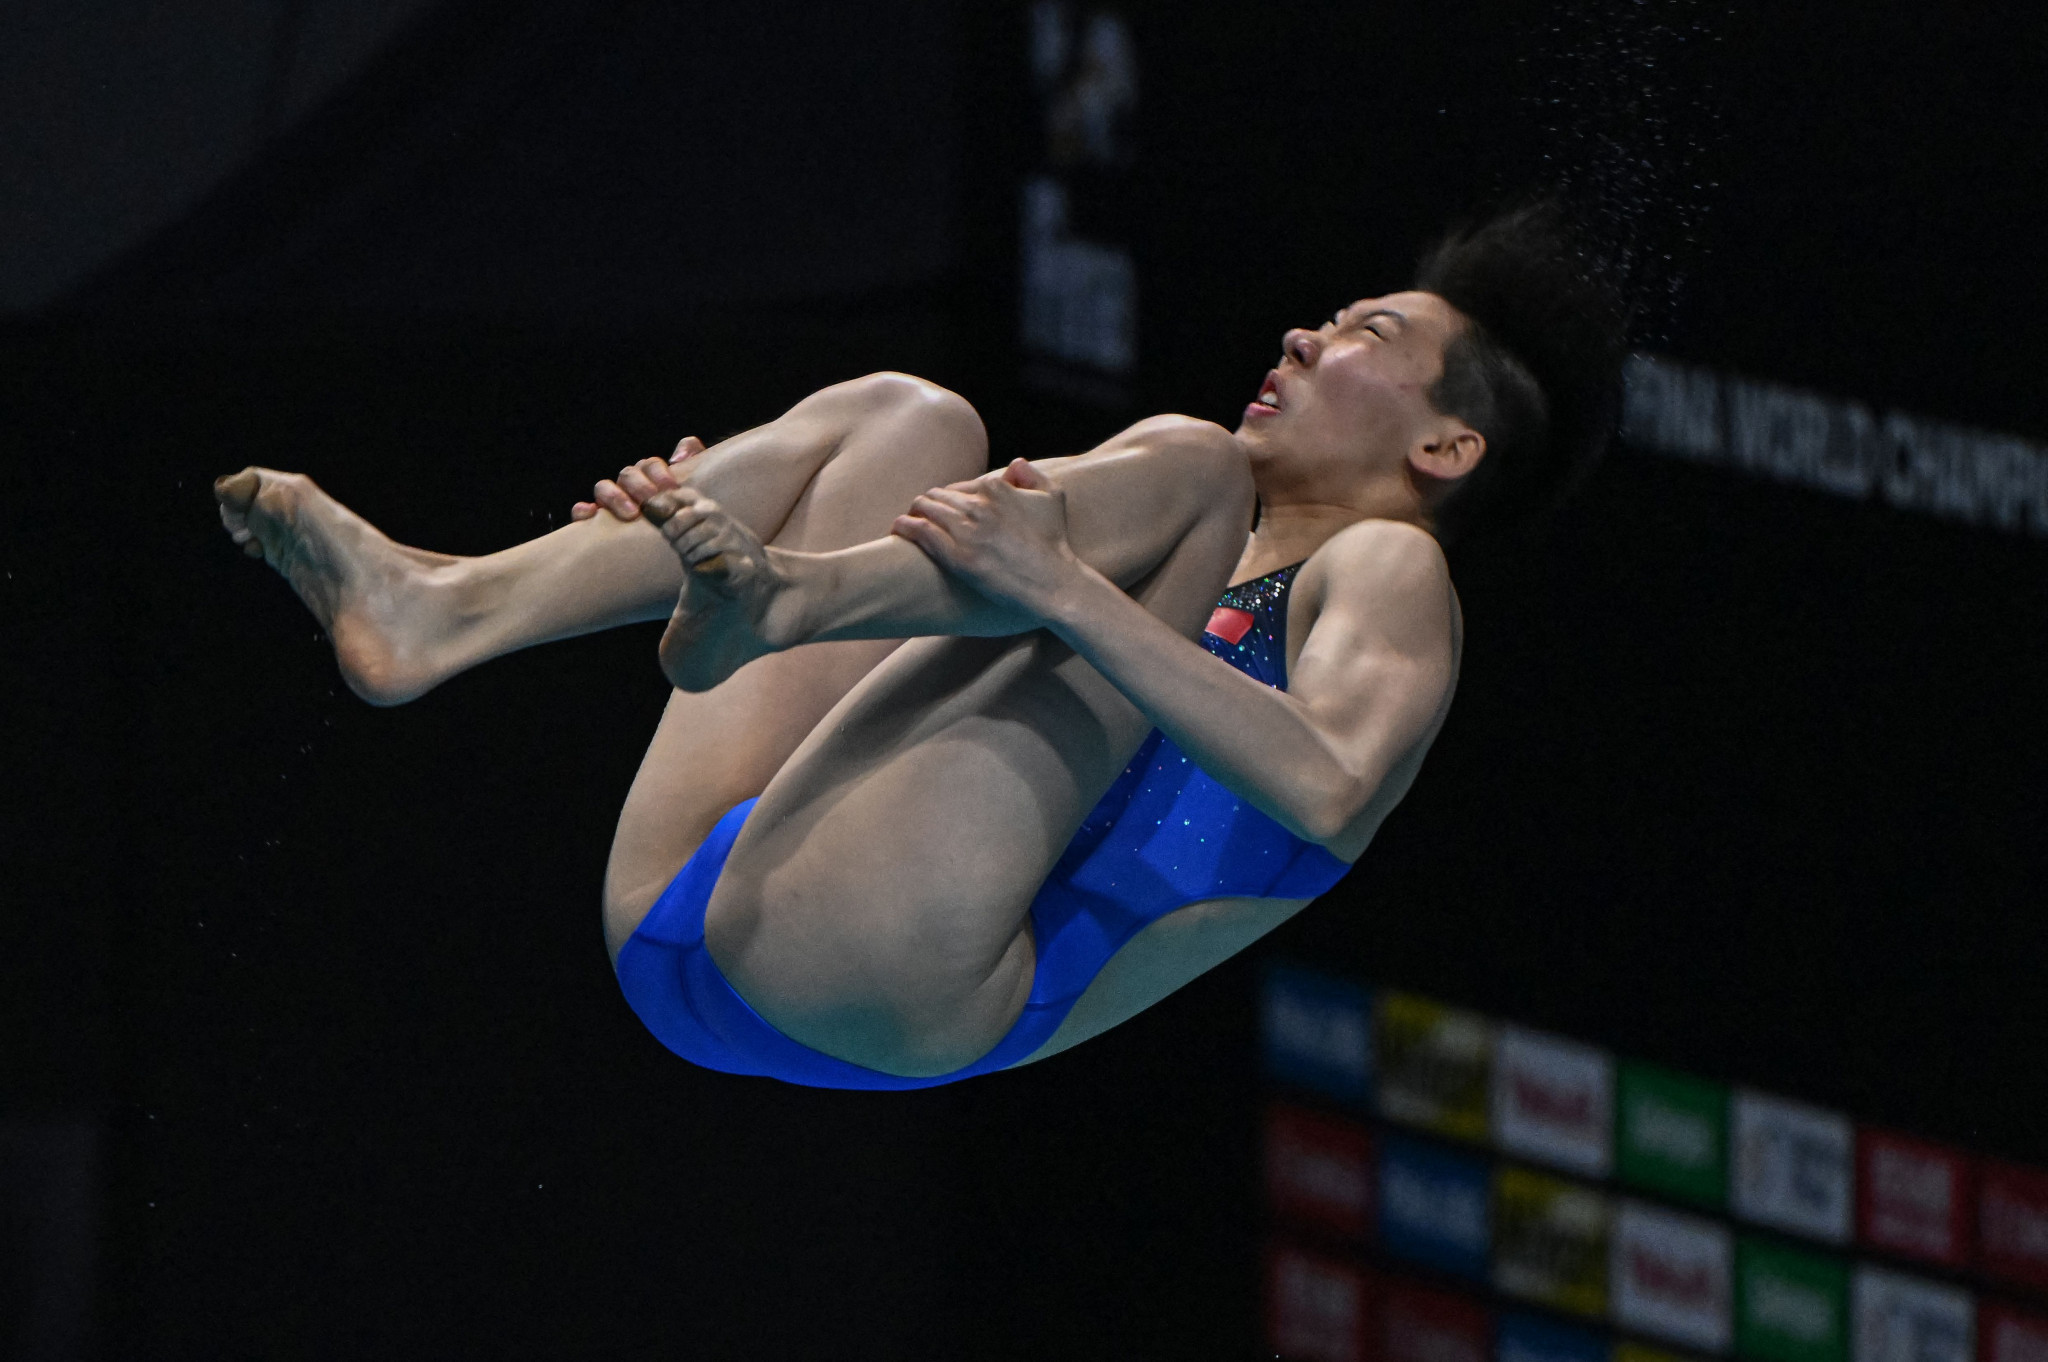 Li Yajie was among three winners for China in today's diving events at the FINA World Championships ©Getty Images